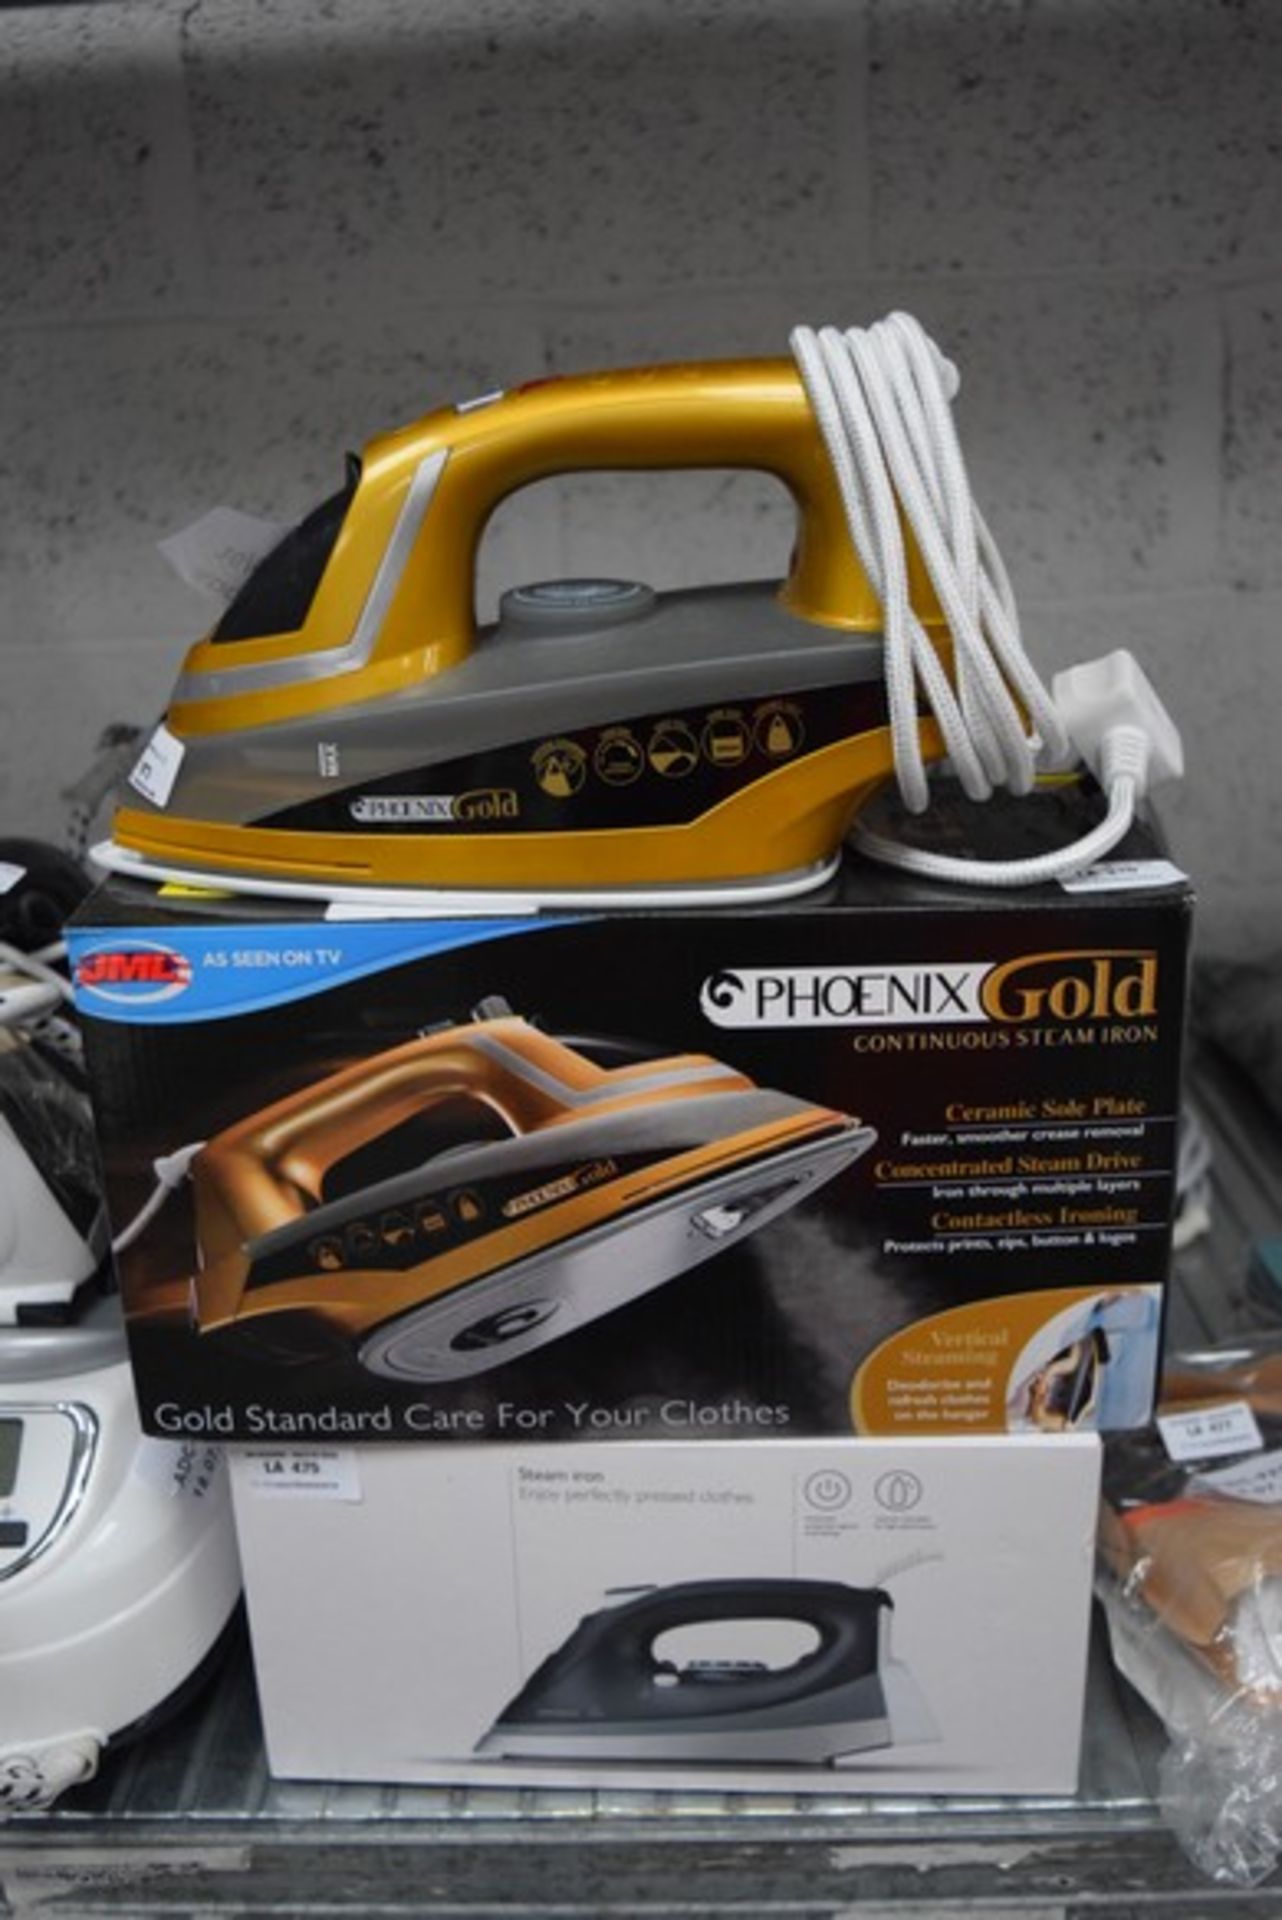 1 x BOXED PHOENIX GOLD CERAMIC SOLE PLATE STEAM IRON RRP £40 10/07/17 *PLEASE NOTE THAT THE BID